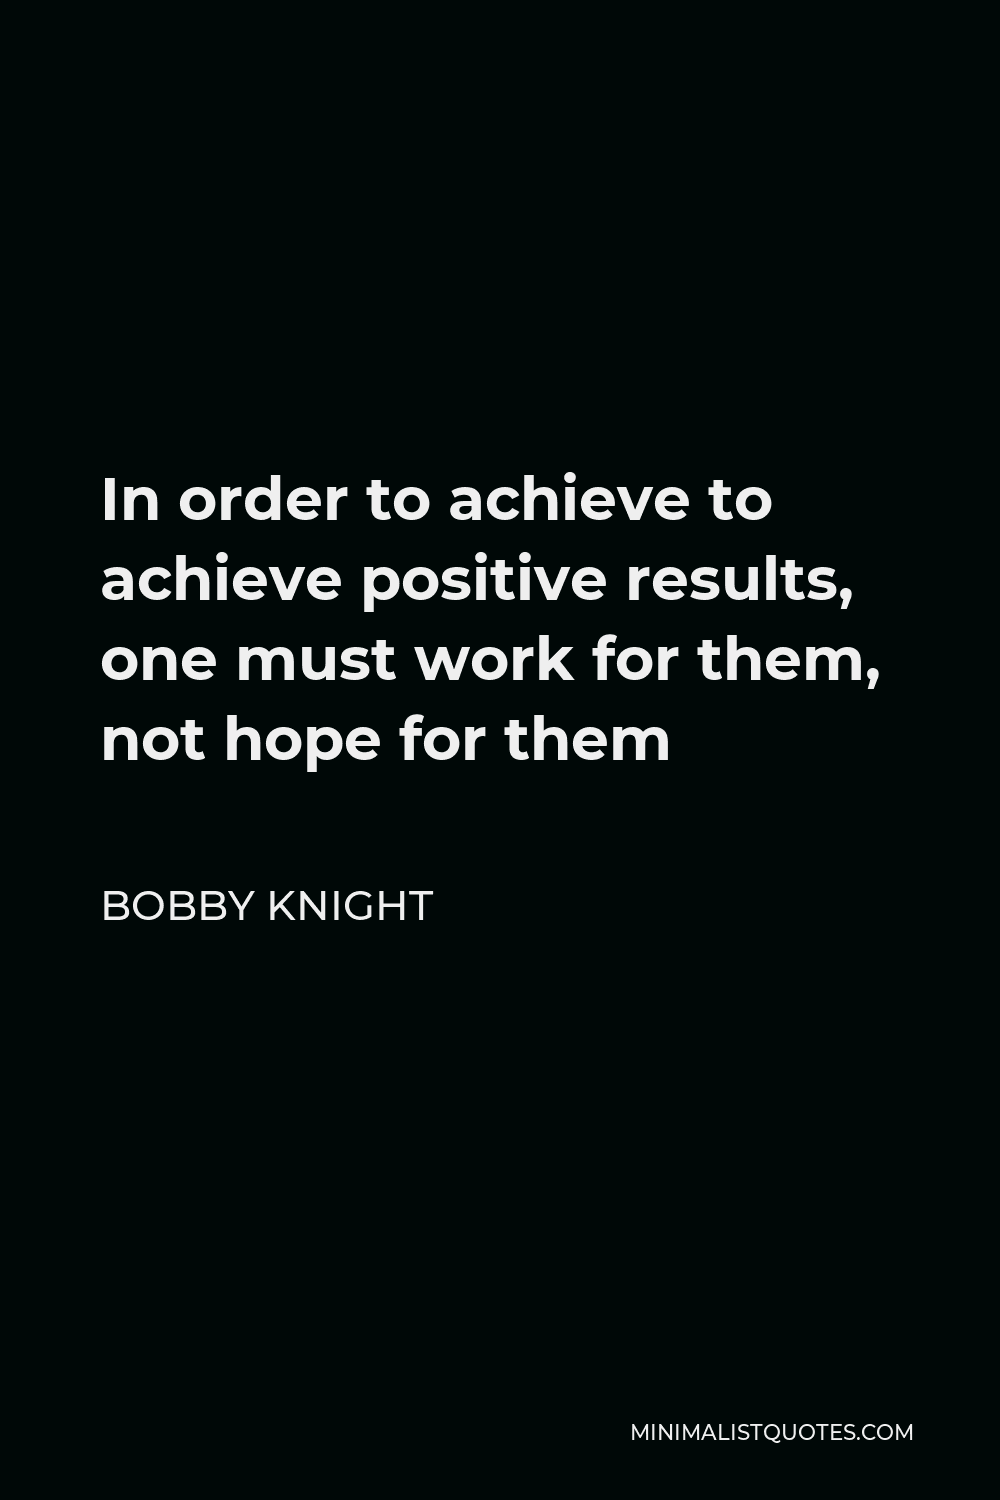 Bobby Knight Quote - In order to achieve to achieve positive results, one must work for them, not hope for them